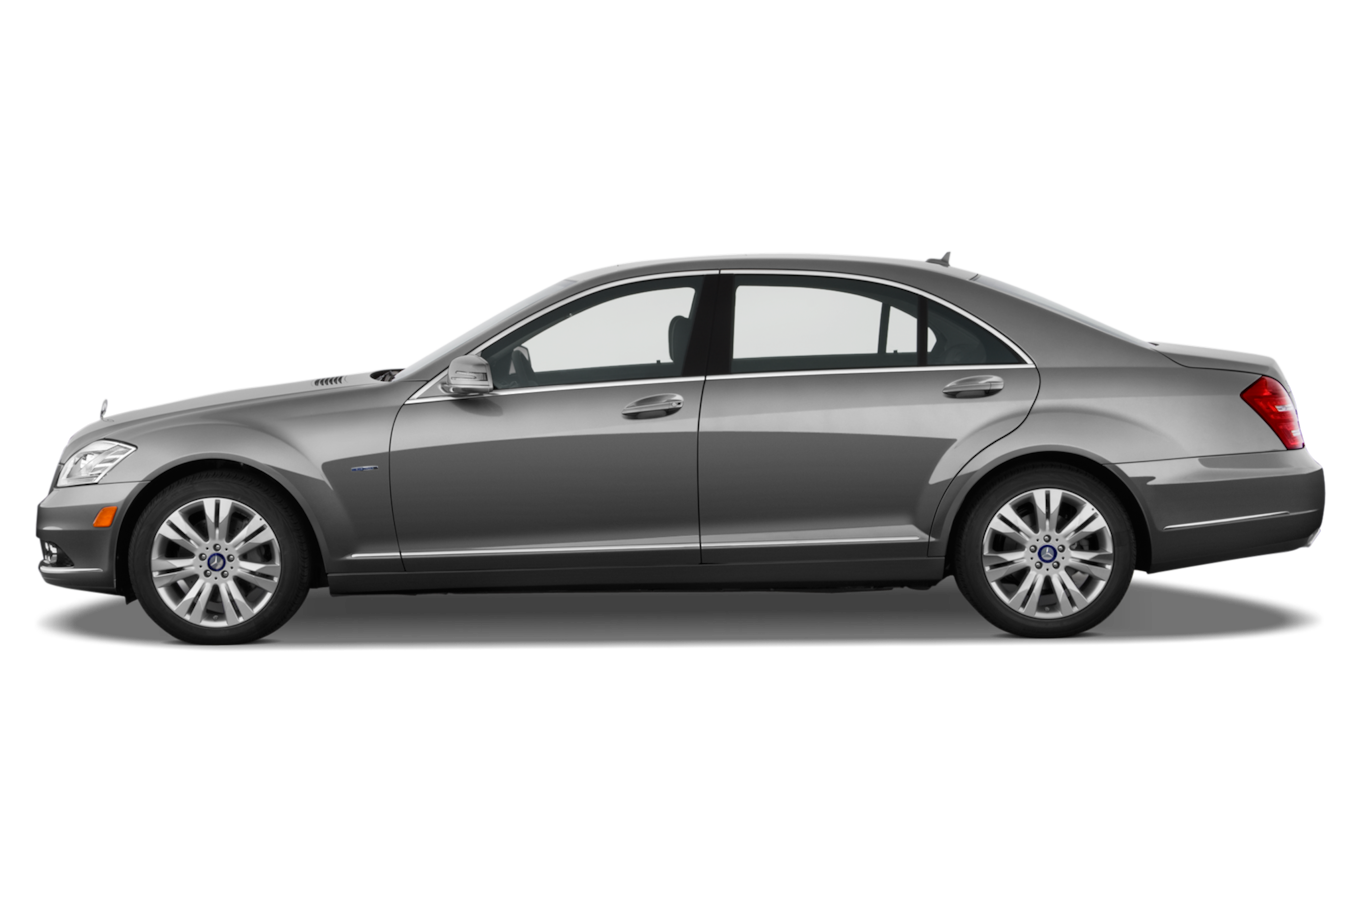 <span style="font-weight: bold;">MERCEDES BENZ S-class LONG W-221</span><br>